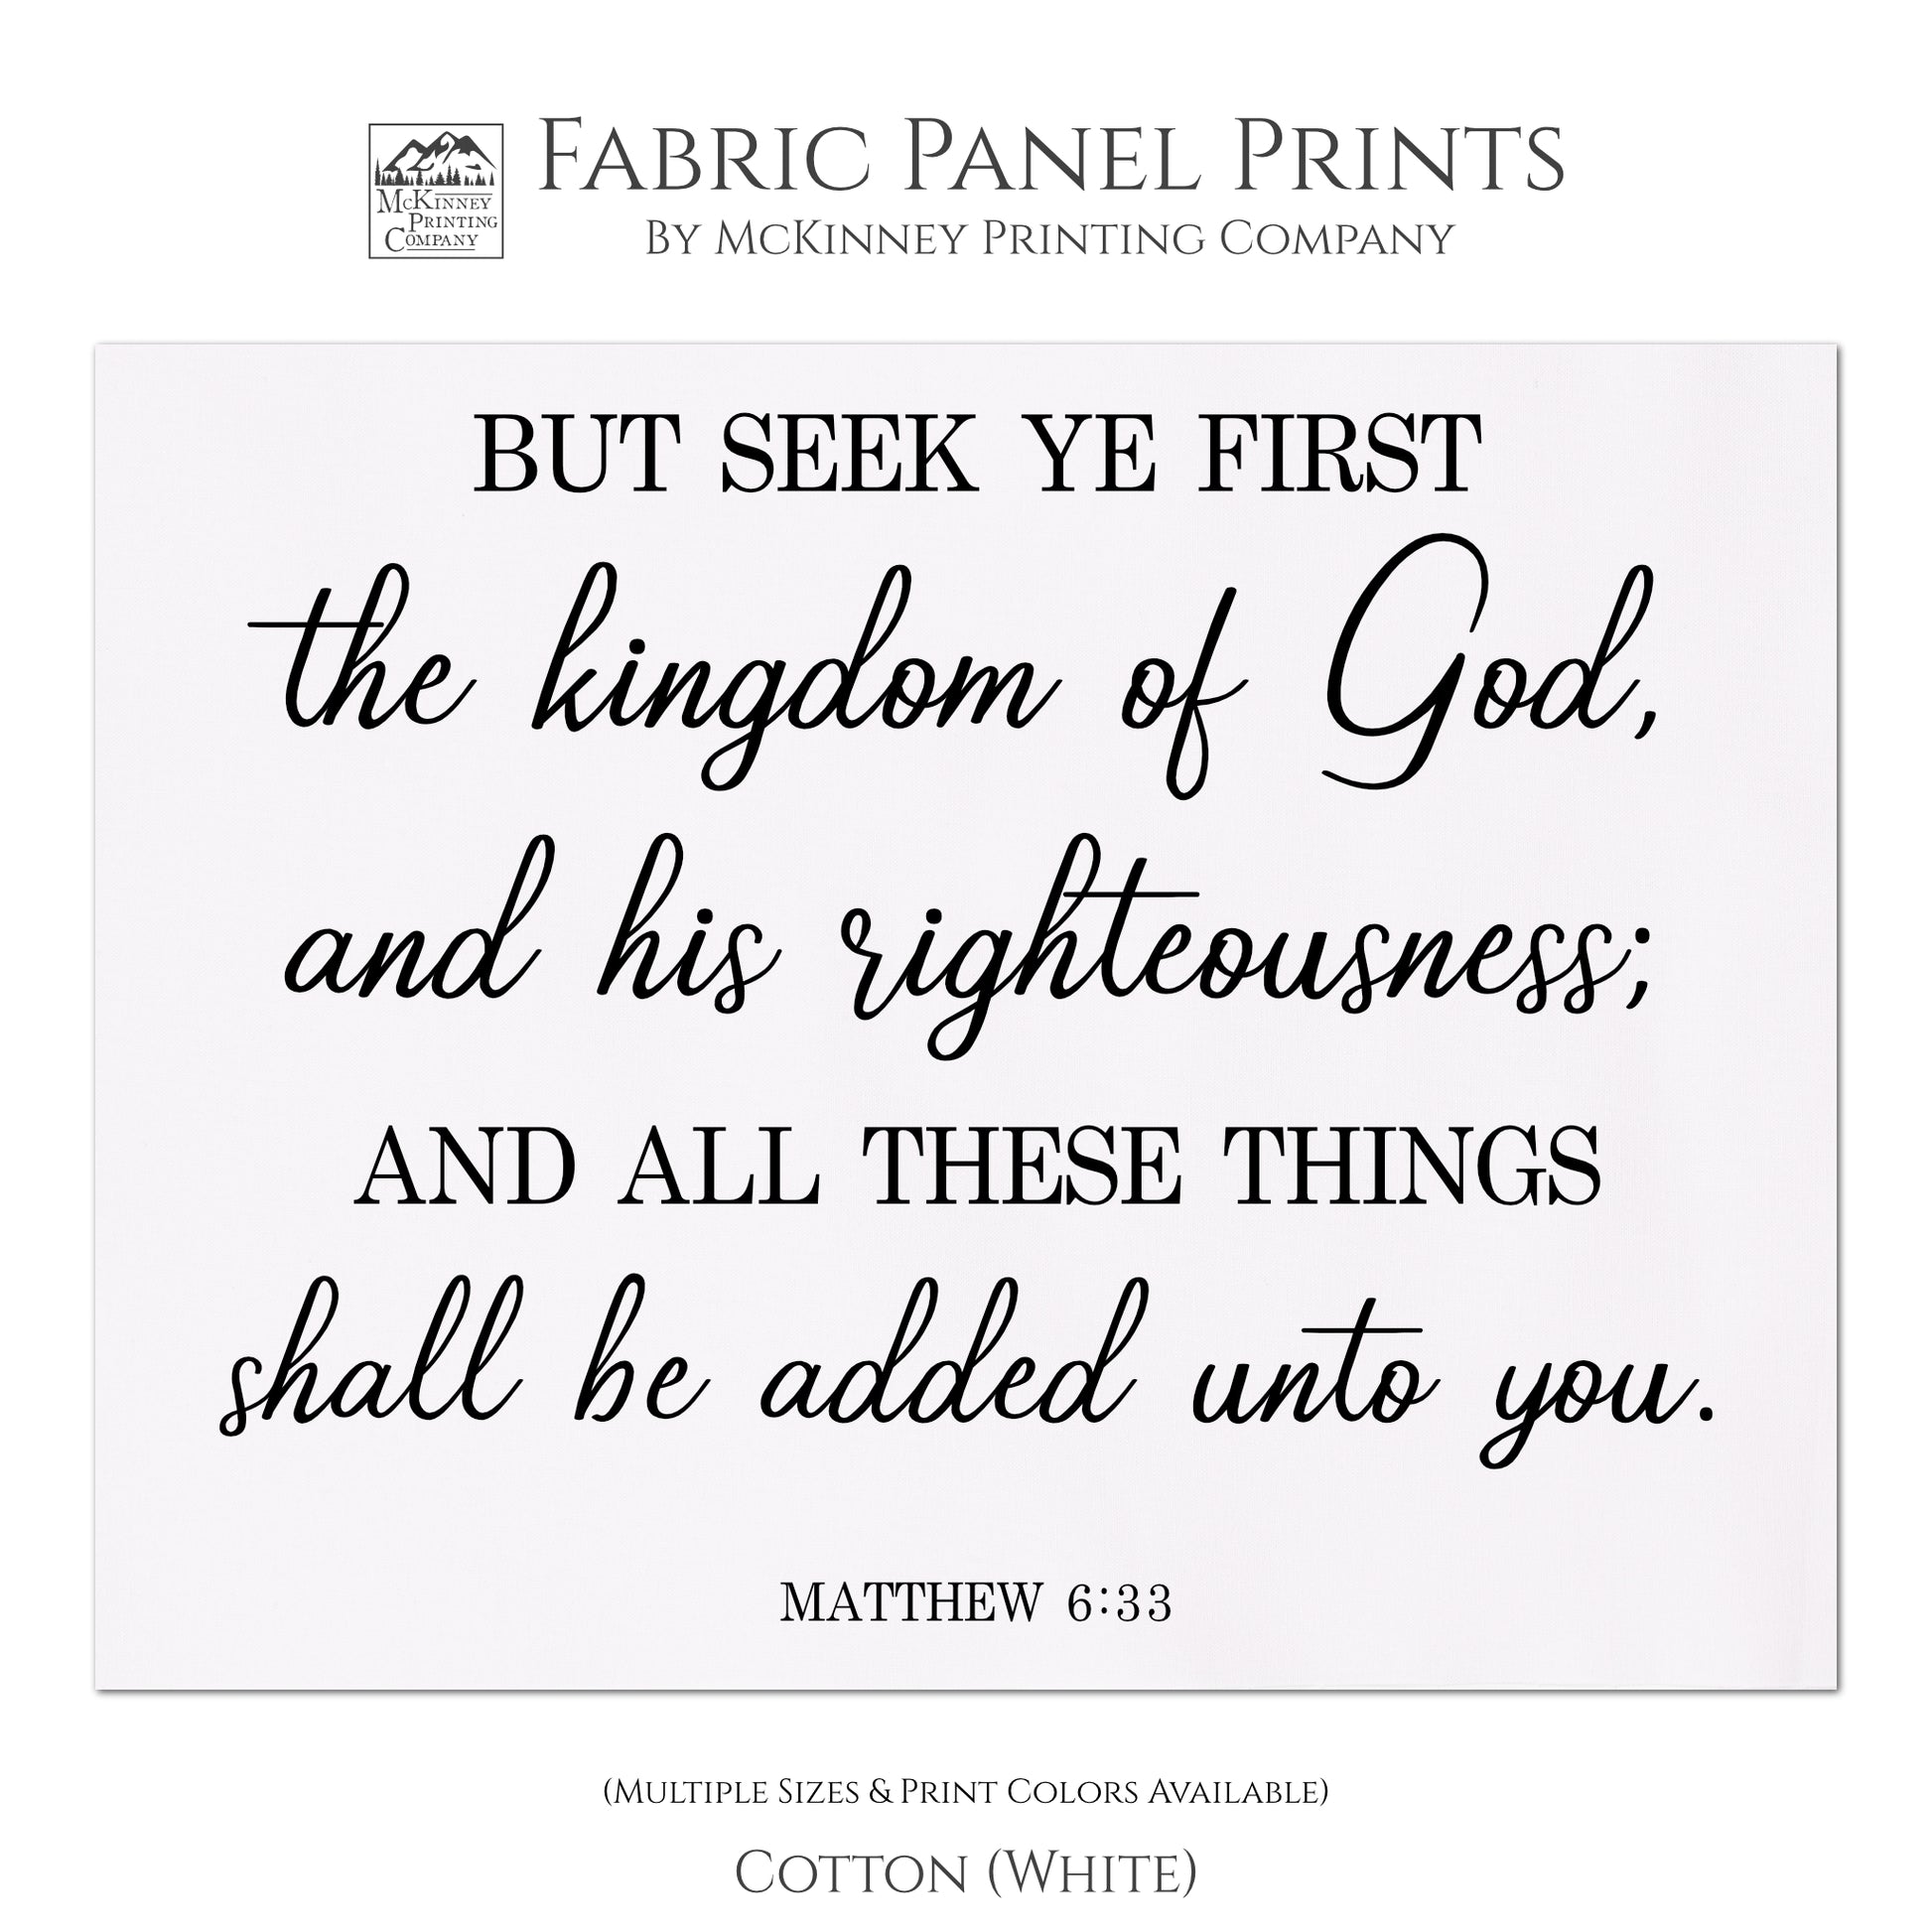 But seek ye first the kingdom of God, and his righteousness; and all these things shall be added unto you. Matthew 6 33, Scripture Fabric, Quilt Block Print, Fabric Panel - Cotton, White